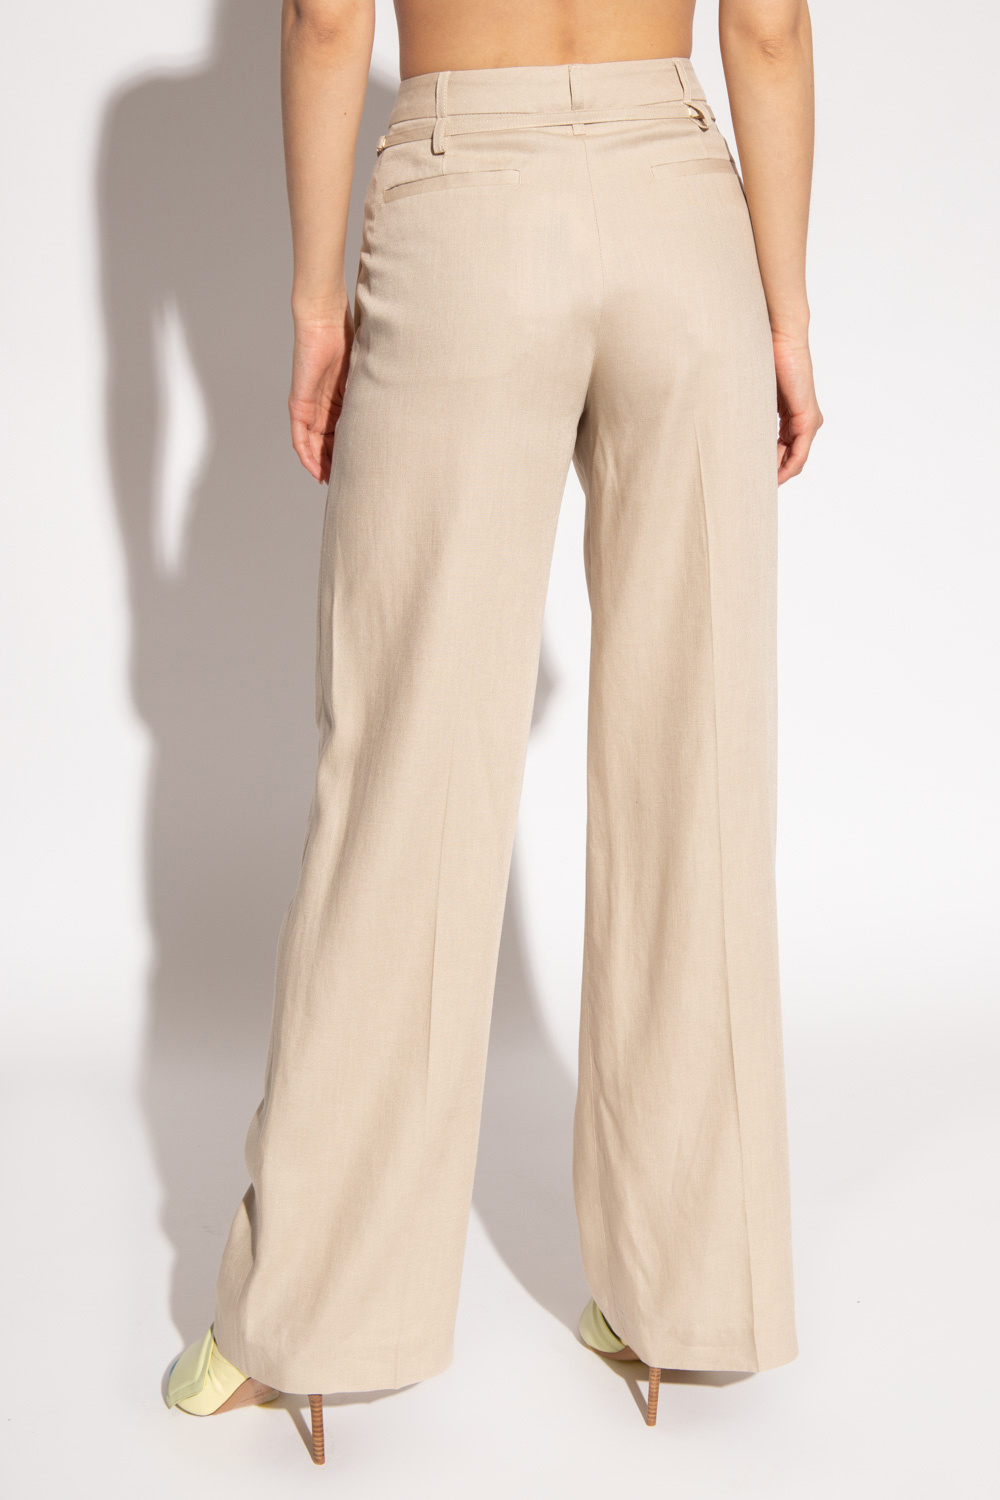 ‘Marino’ trousers with wide legs Jacquemus - Vitkac KR